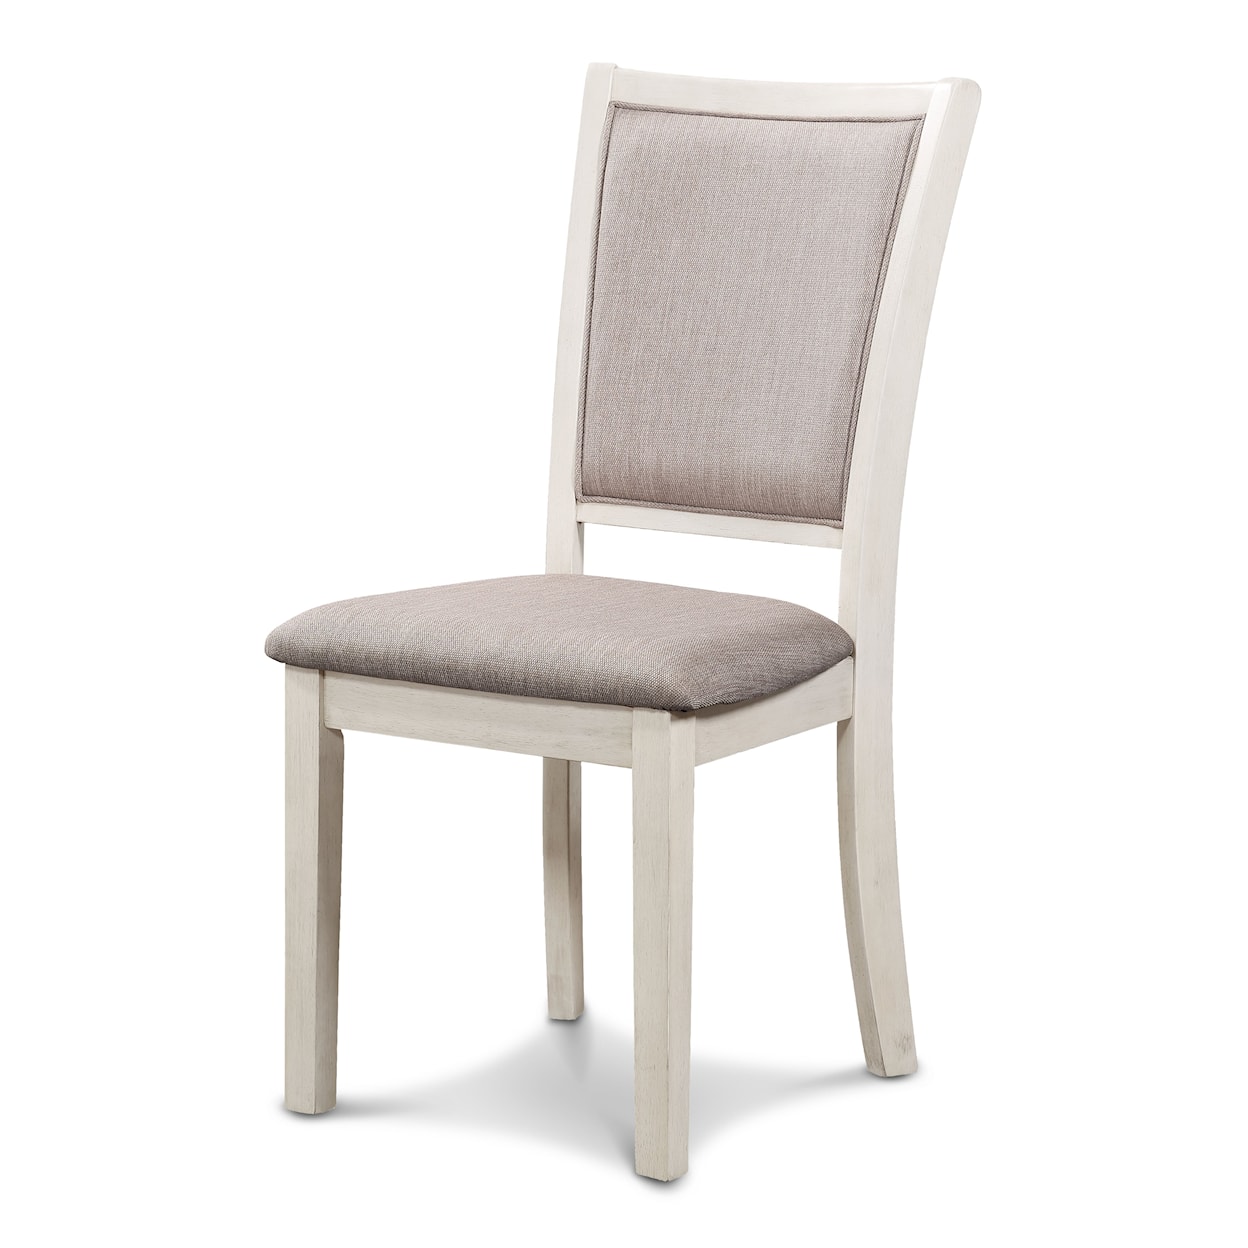 New Classic Furniture Amy Dining Chair